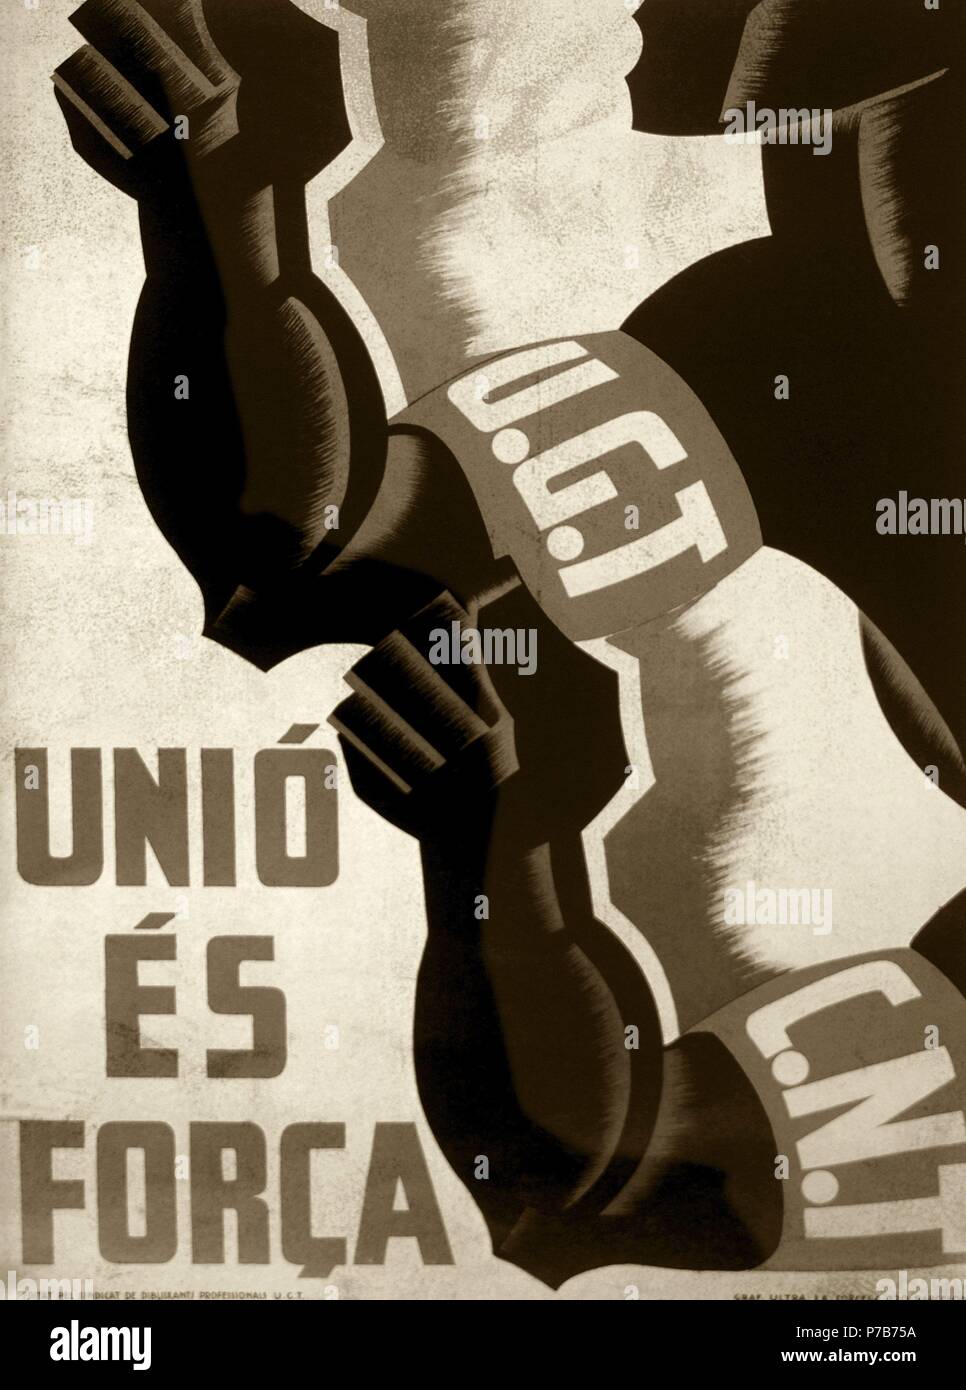 Spanish Civil War (1936-1939). Propaganda poster in catalan of Union is Force on the agreement between UGT (General Workers Union) and CNT (National Confederation of Labor), 1936. Stock Photo